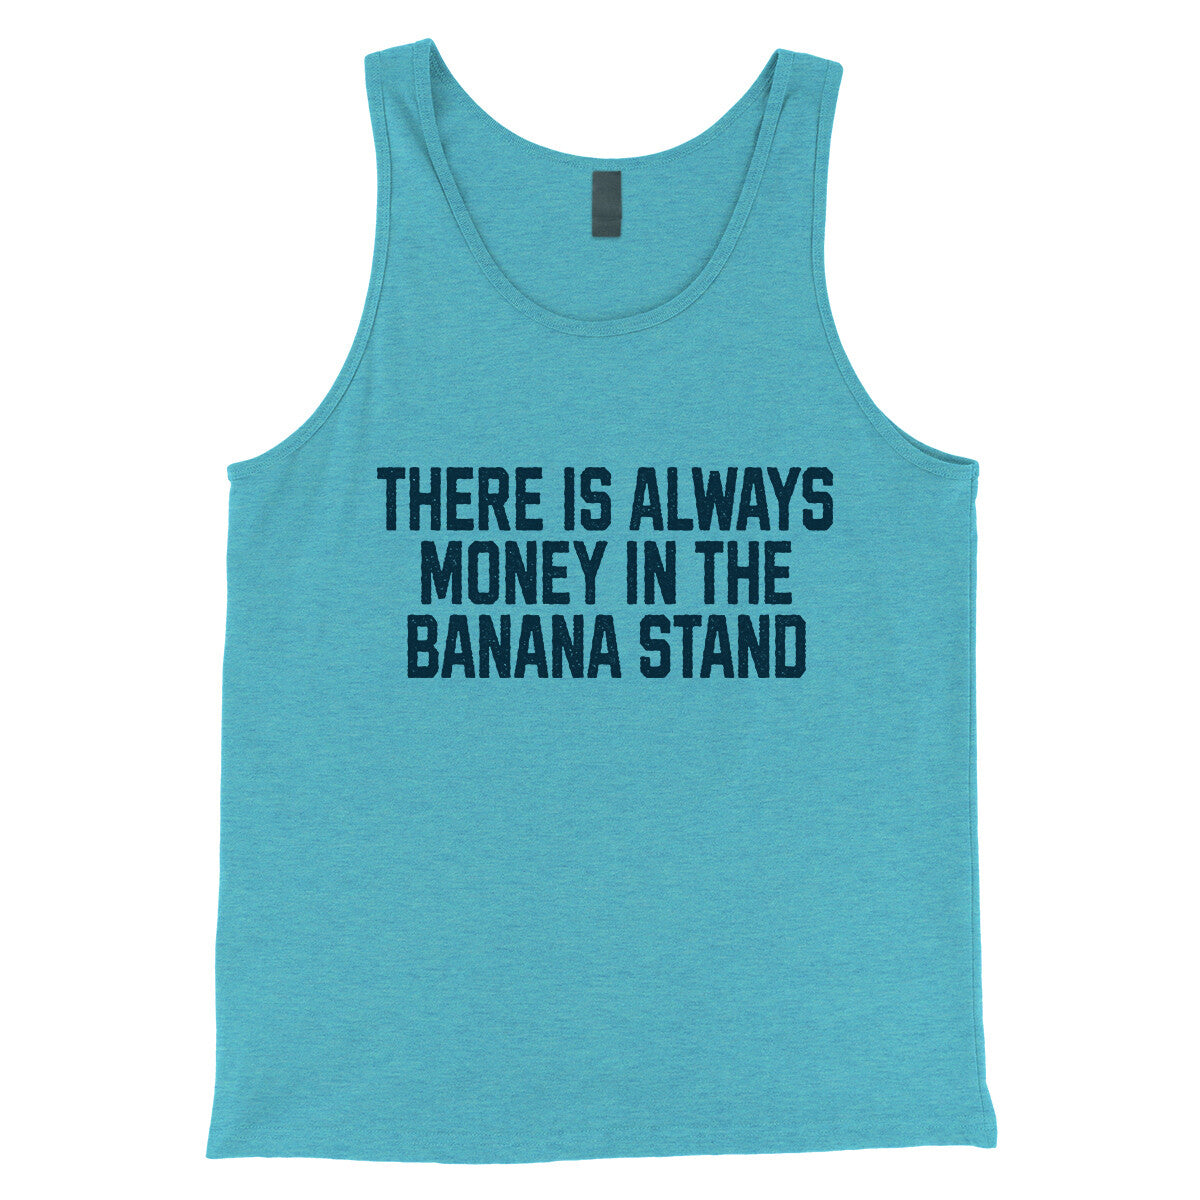 There is Always Money in the Banana Stand in Aqua Triblend Color